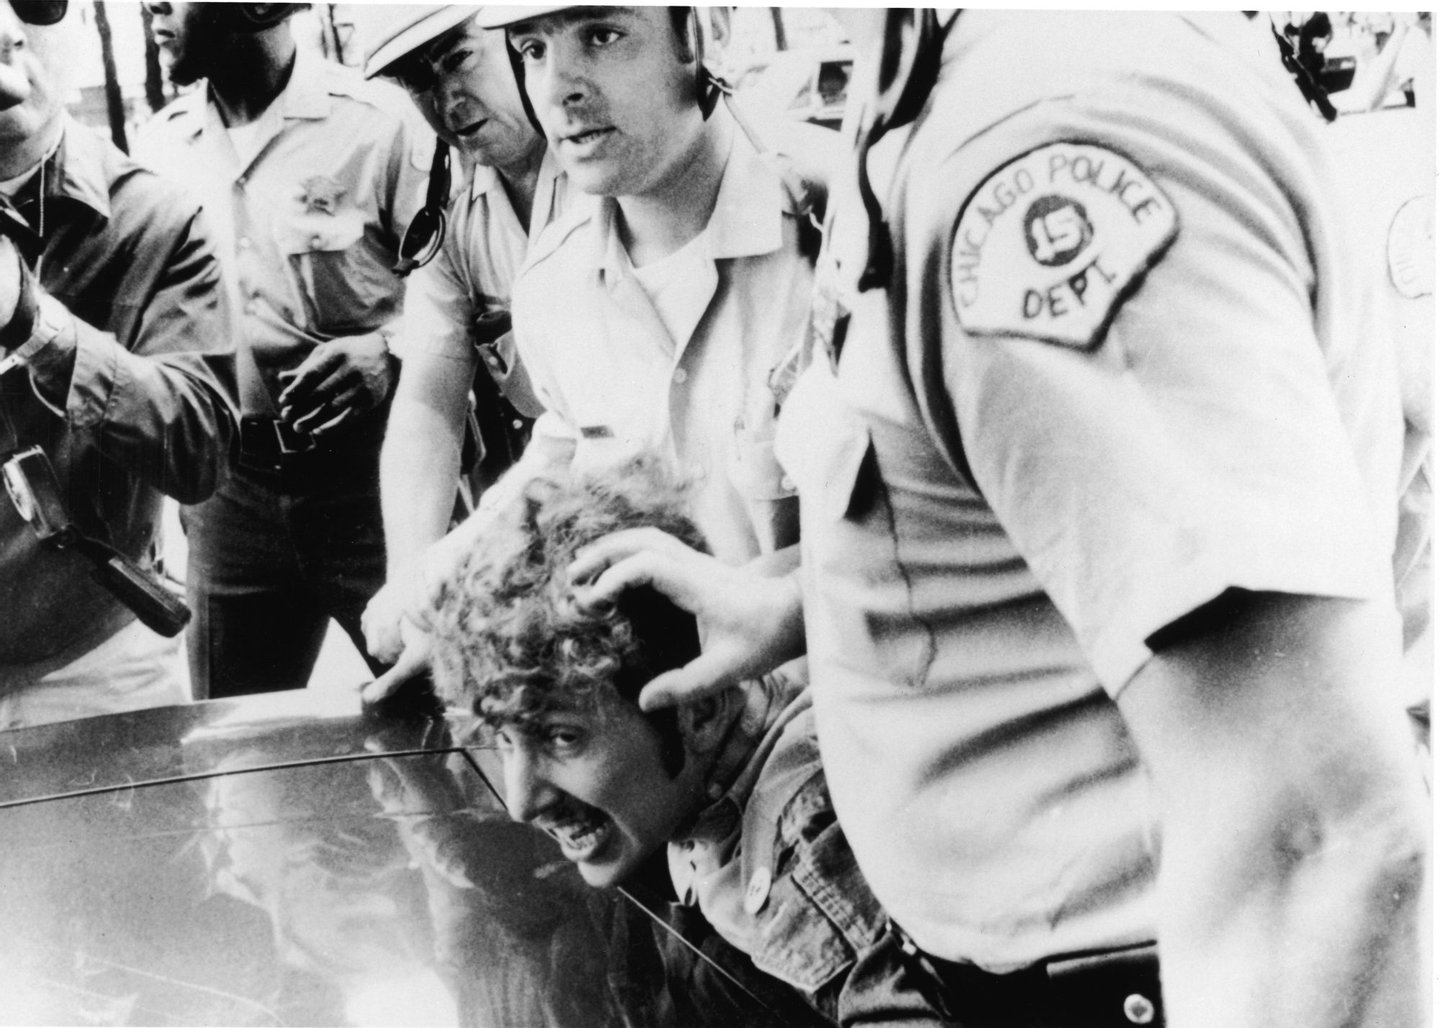 Officers from the Chicago Police Department push a protestor's head against the hood of a car as they restrain him after he climbed onto a wooden barricade near the Democratic headquarters of the 1968 Democratic National Convention and waved a Vietcong flag during anti-Vietnam War demonstrations, Chicago, Illinois, August 26, 1968. (Photo by APA/Getty Images)